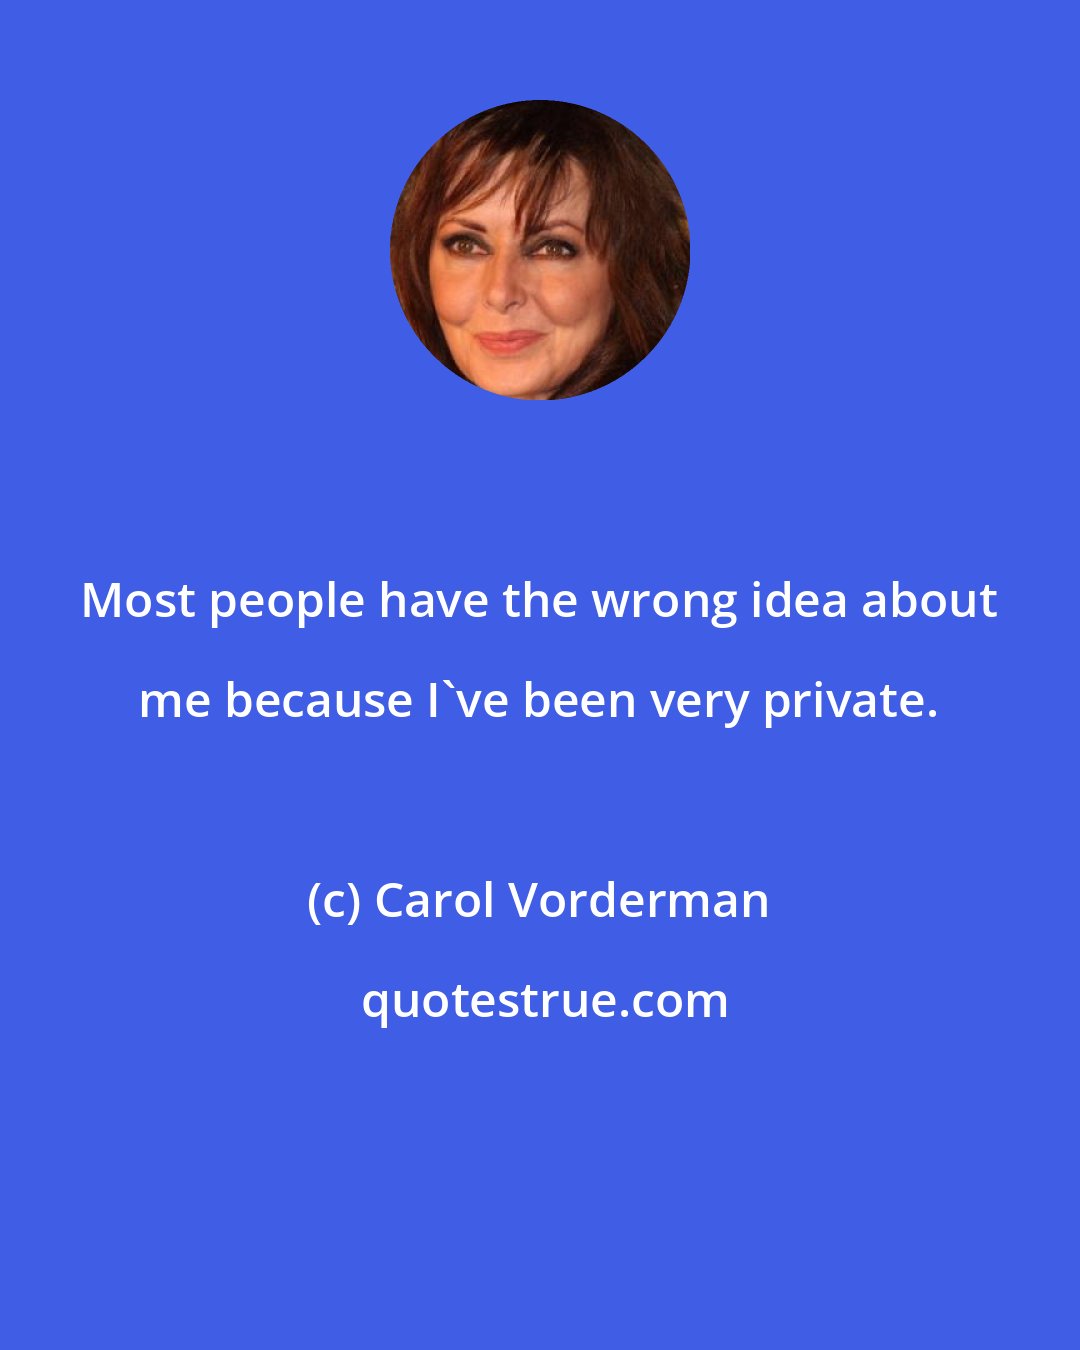 Carol Vorderman: Most people have the wrong idea about me because I've been very private.